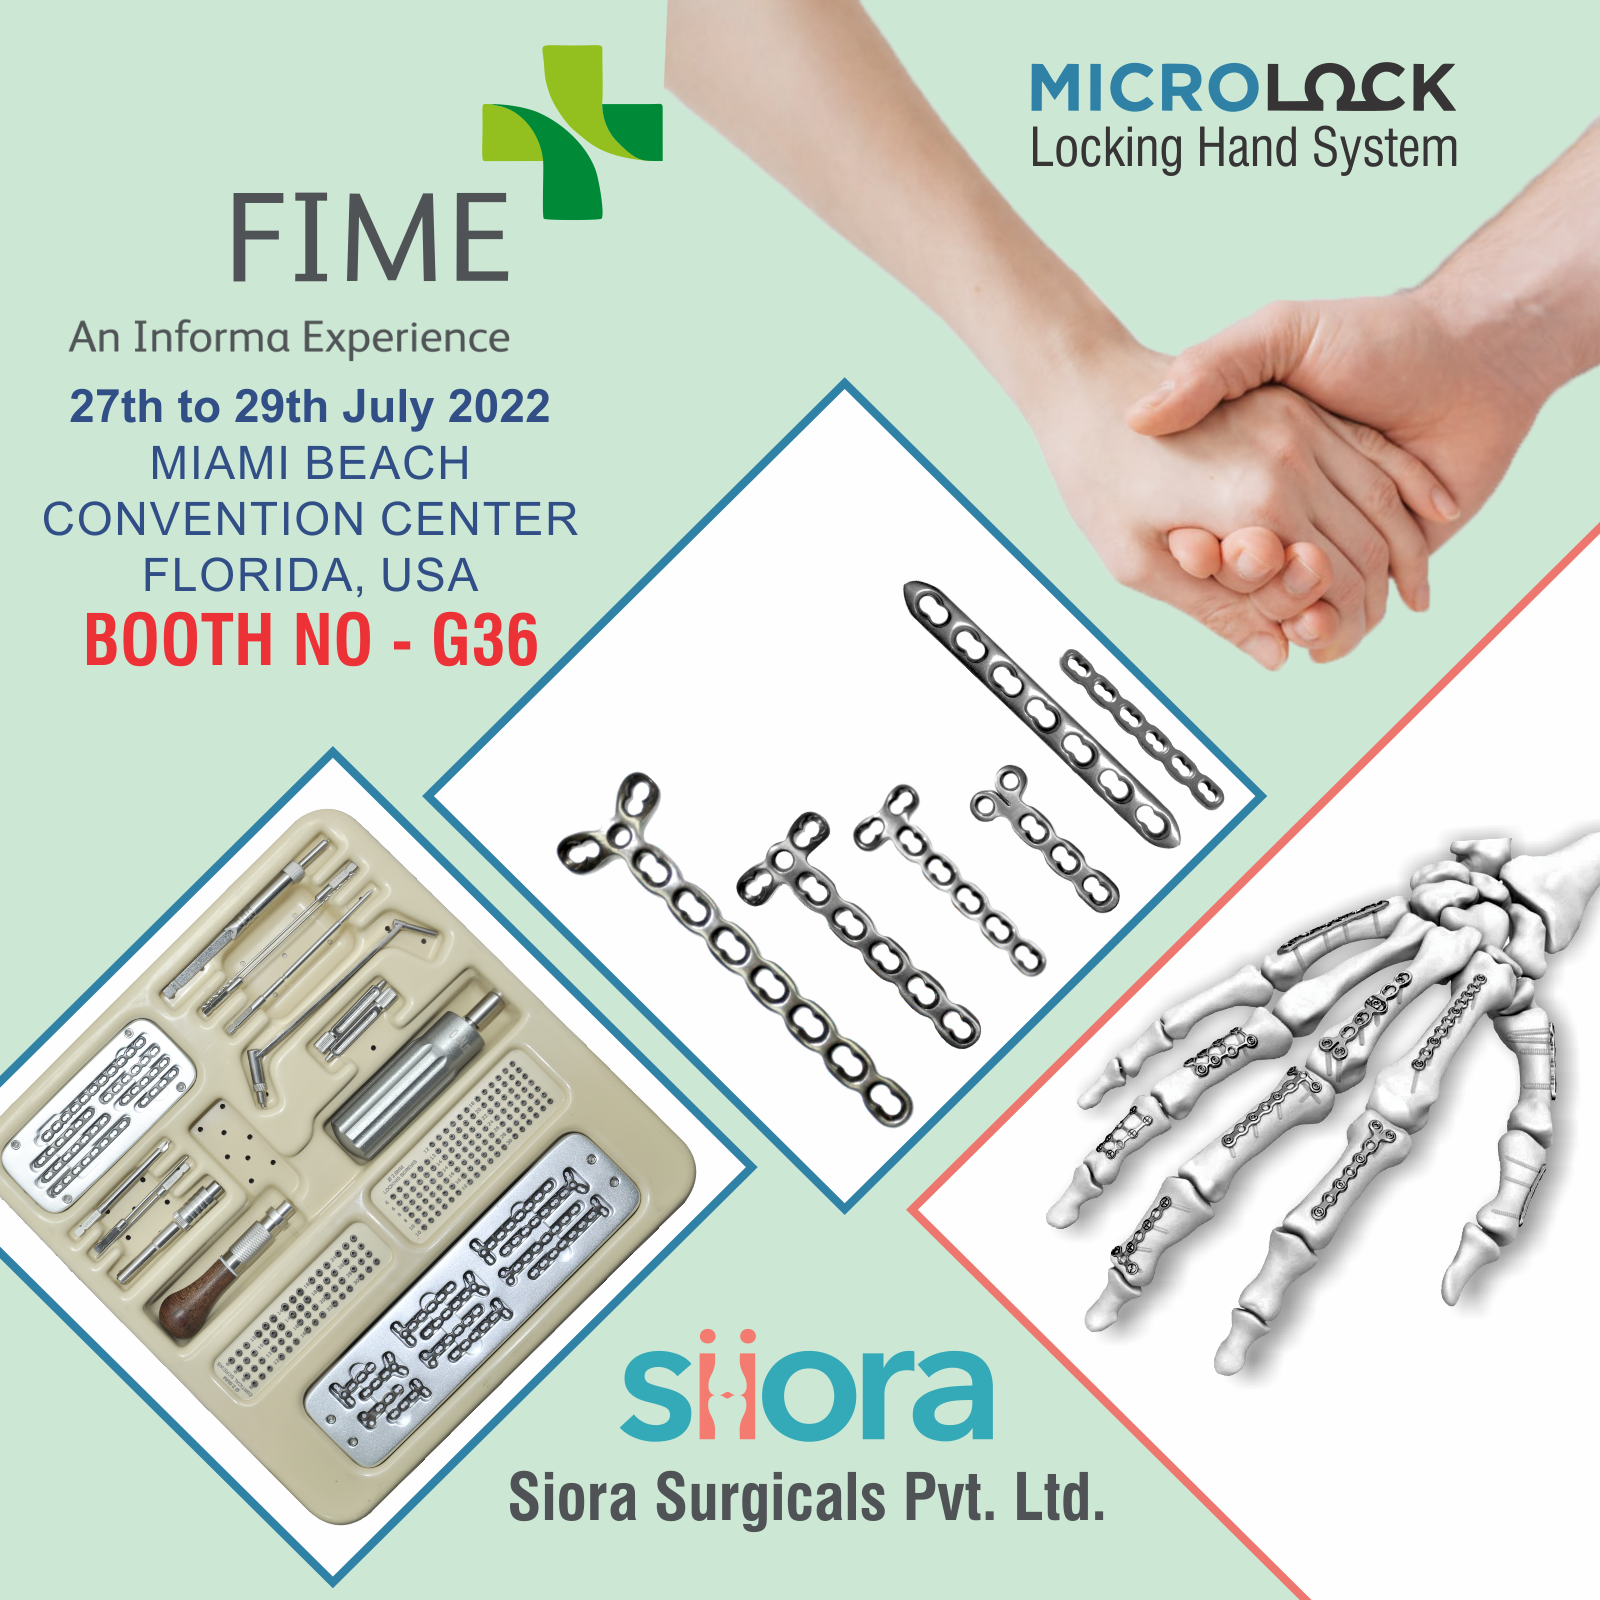 FIME Medical Expo